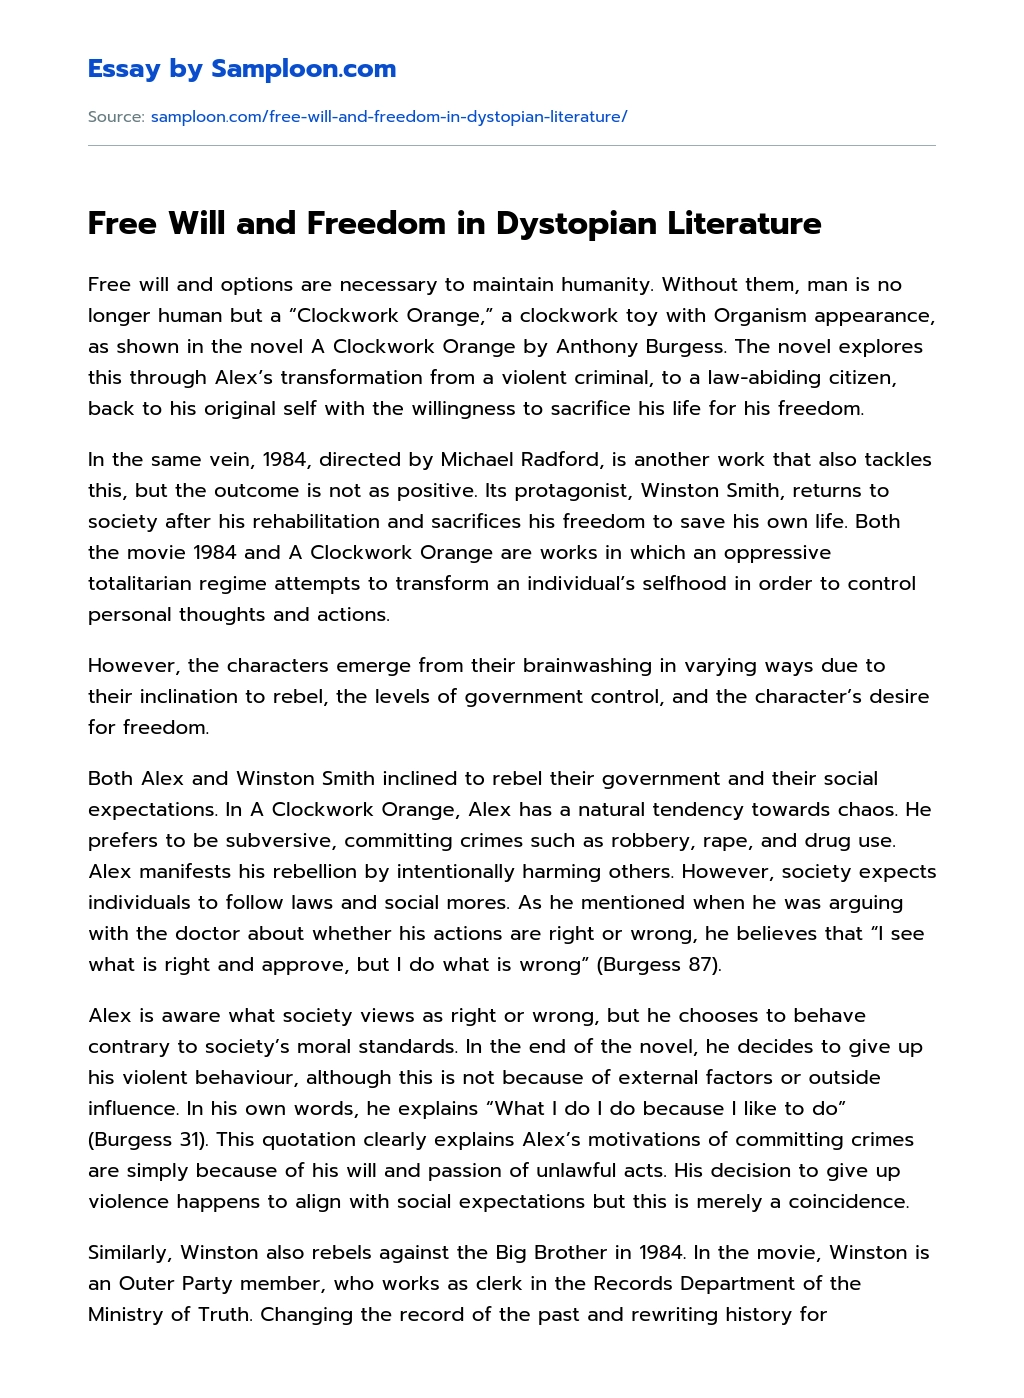 Free Will and Freedom in Dystopian Literature essay